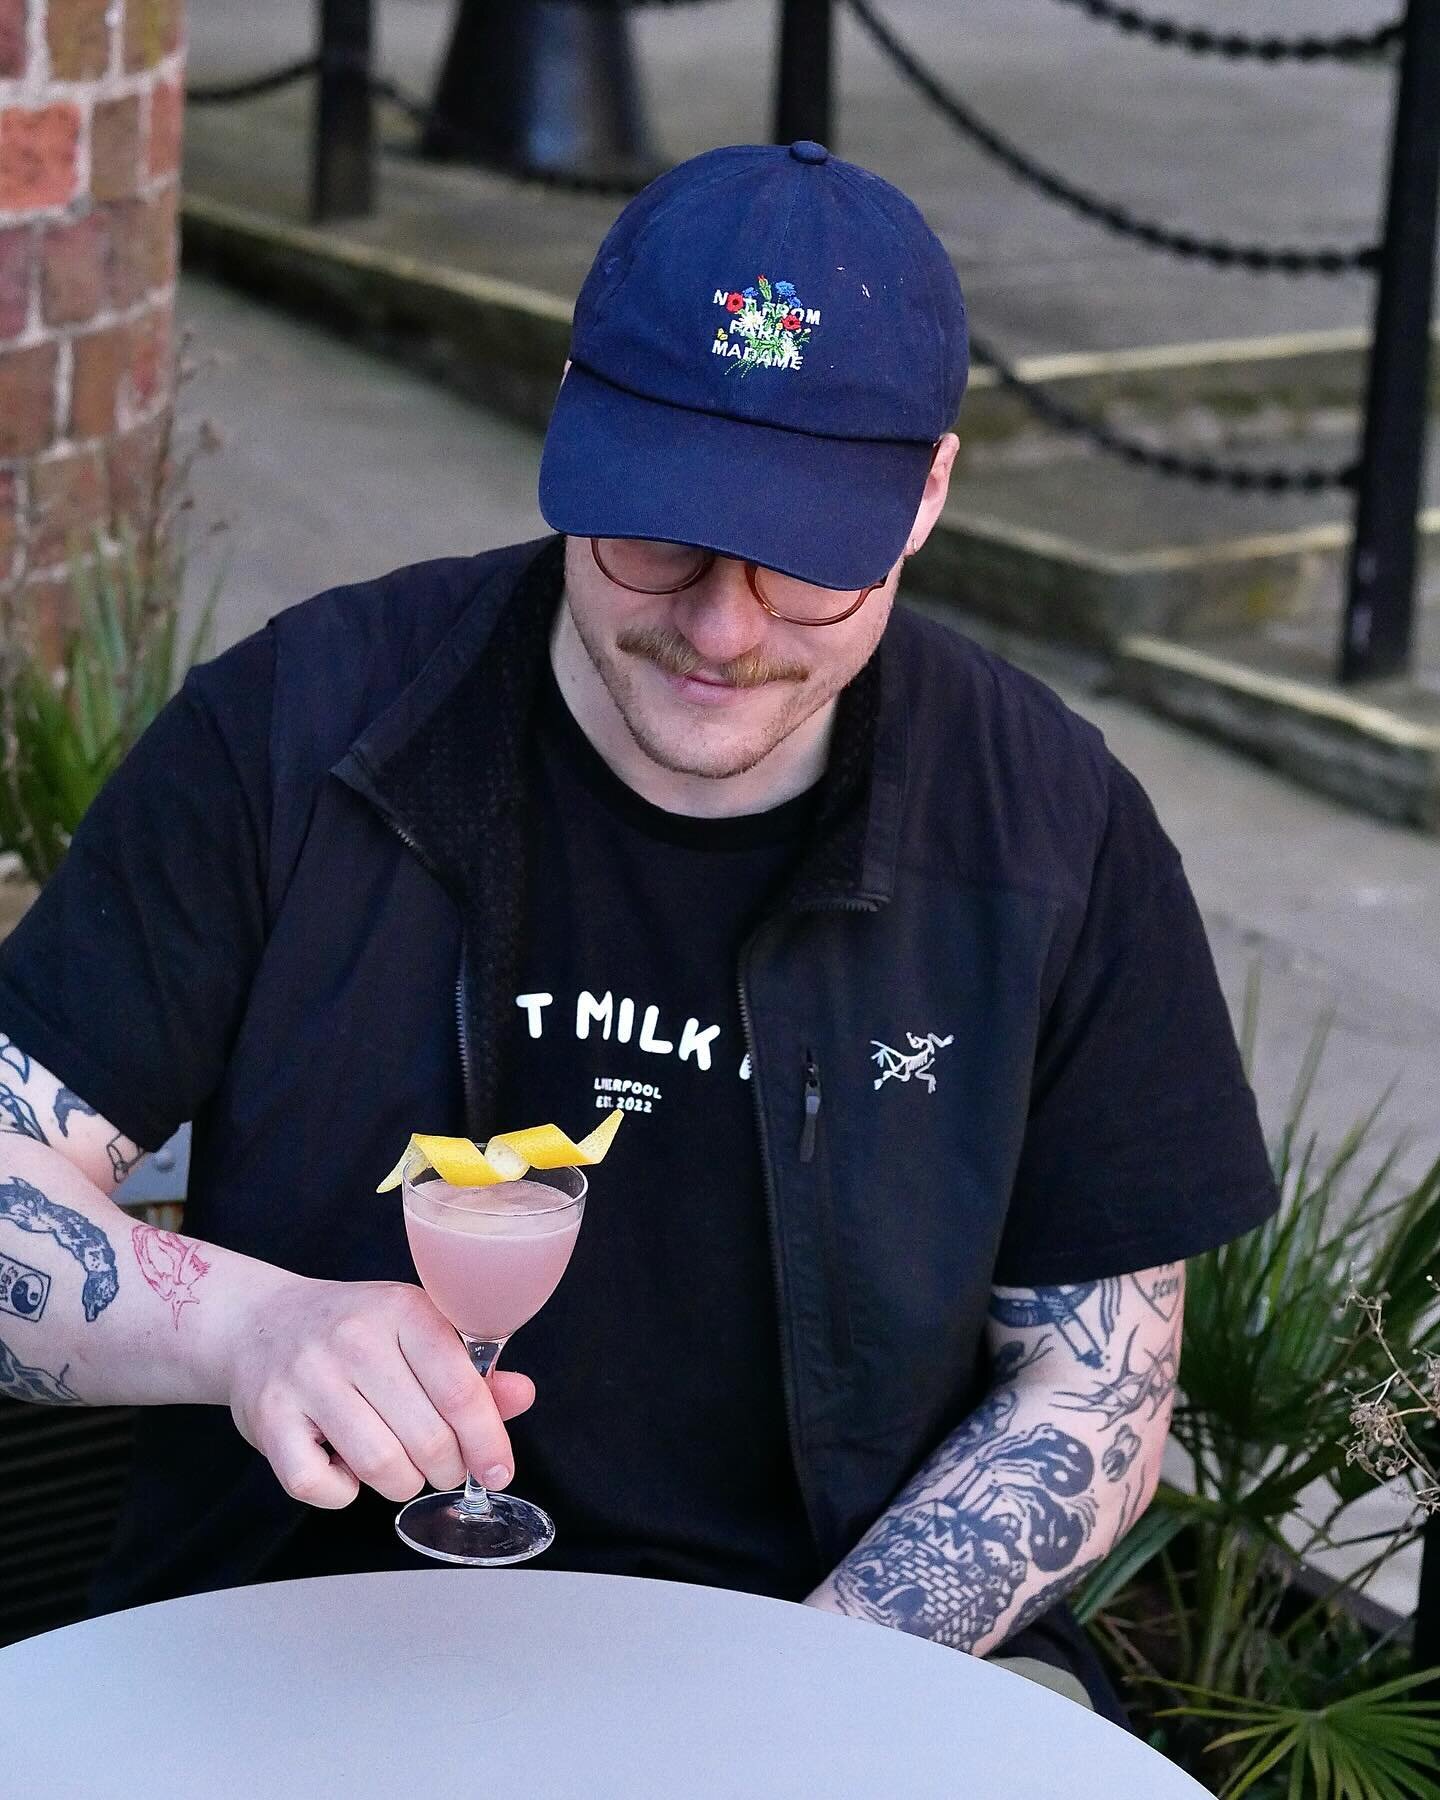 🌱 SPRING HAS SPRUNG BABY 🌼

We&rsquo;ve thrown a spring special on to get us in that summery mood. 

Gin
Cocchi Rosa
Watermelon Syrup
Lemon

Available all day
&pound;7 each or two for &pound;12

Here til midnight

🌸🥛🏨